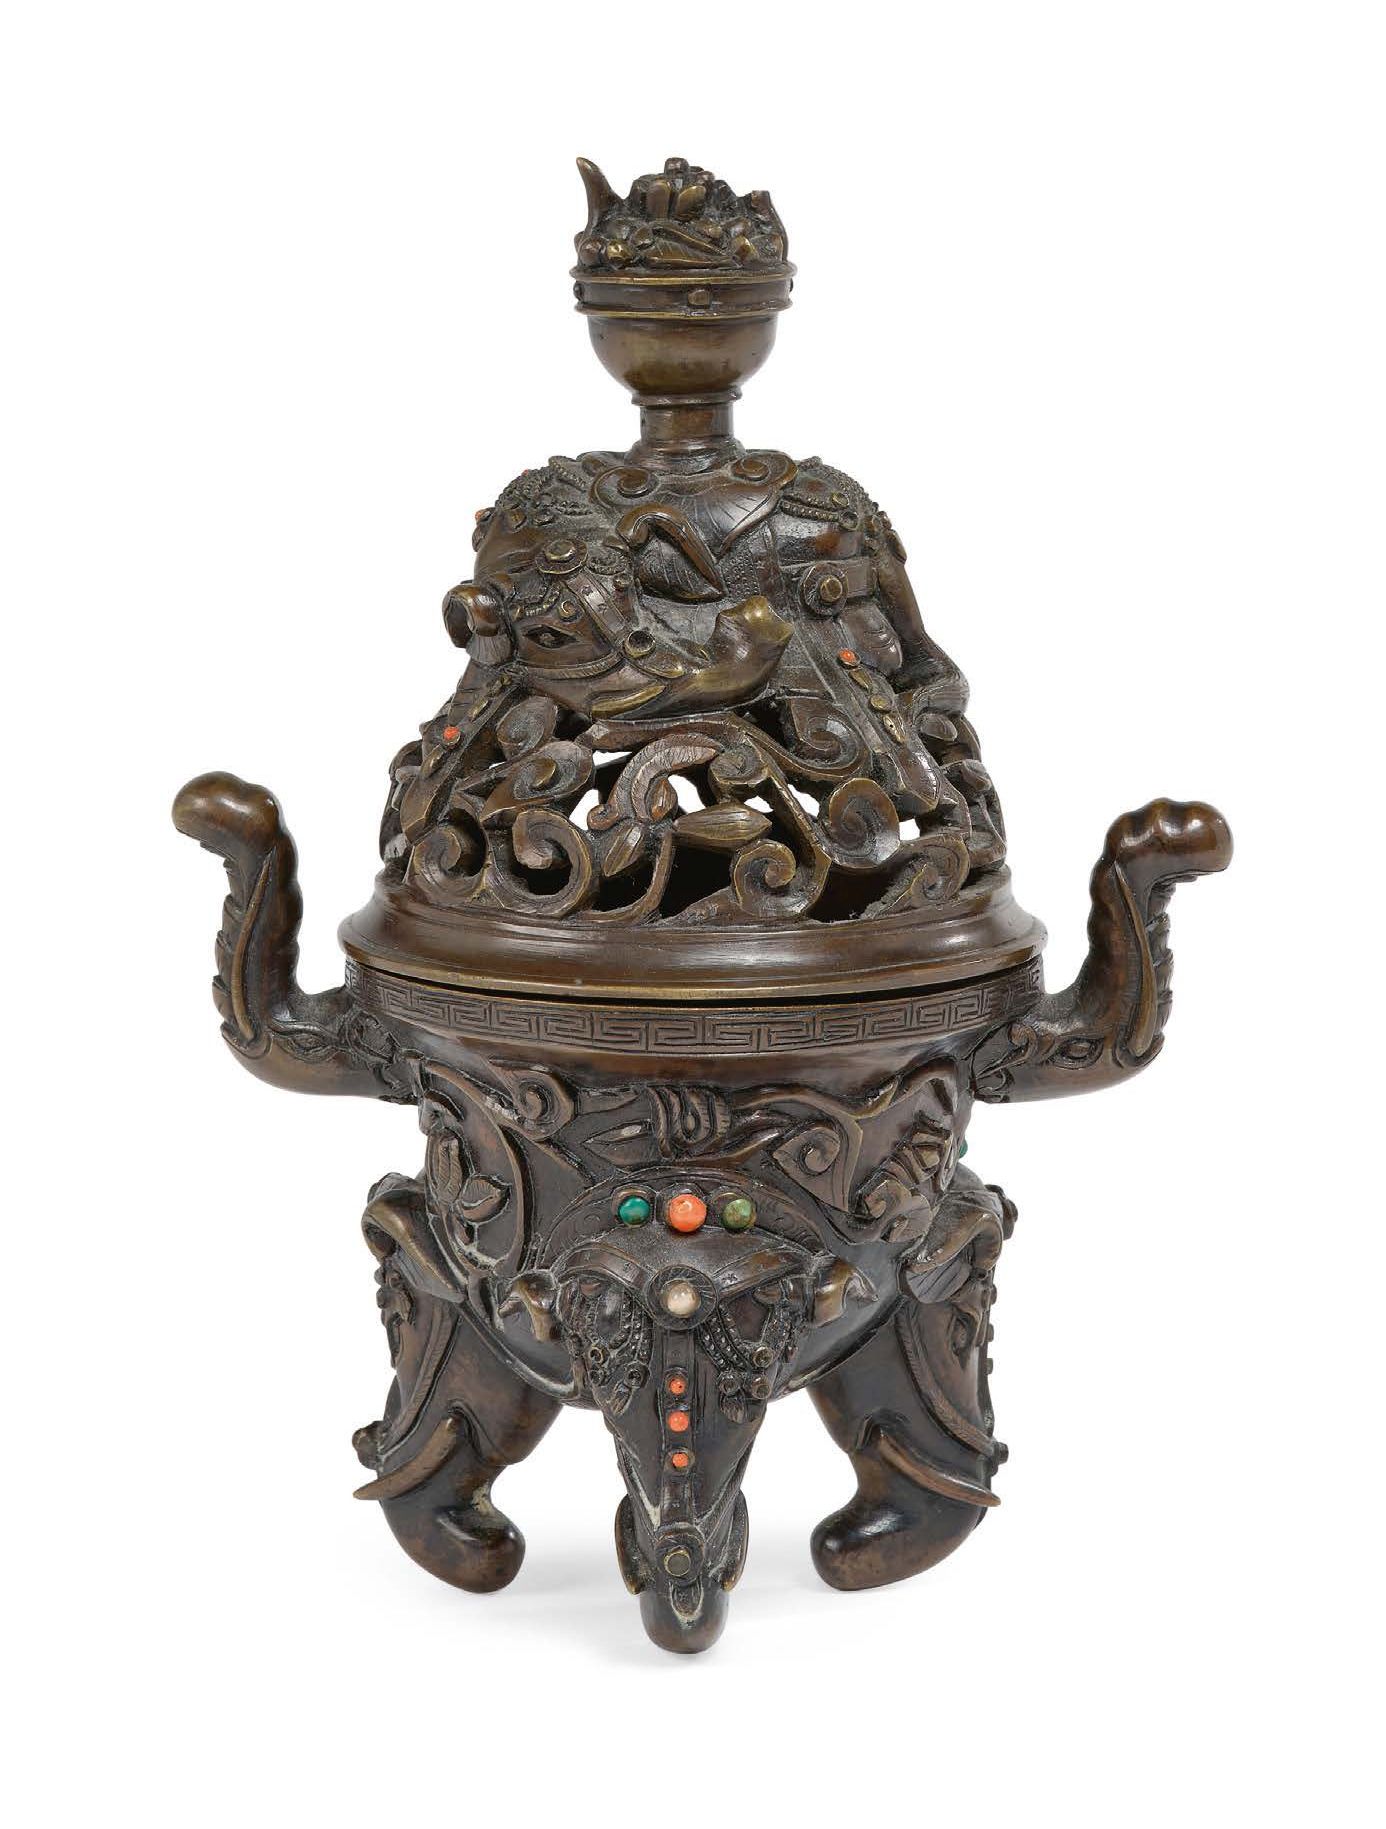 CHINE DYNASTIE QING, XIXe SIÈCLE Small covered incense burner made of bronze wit&hellip;